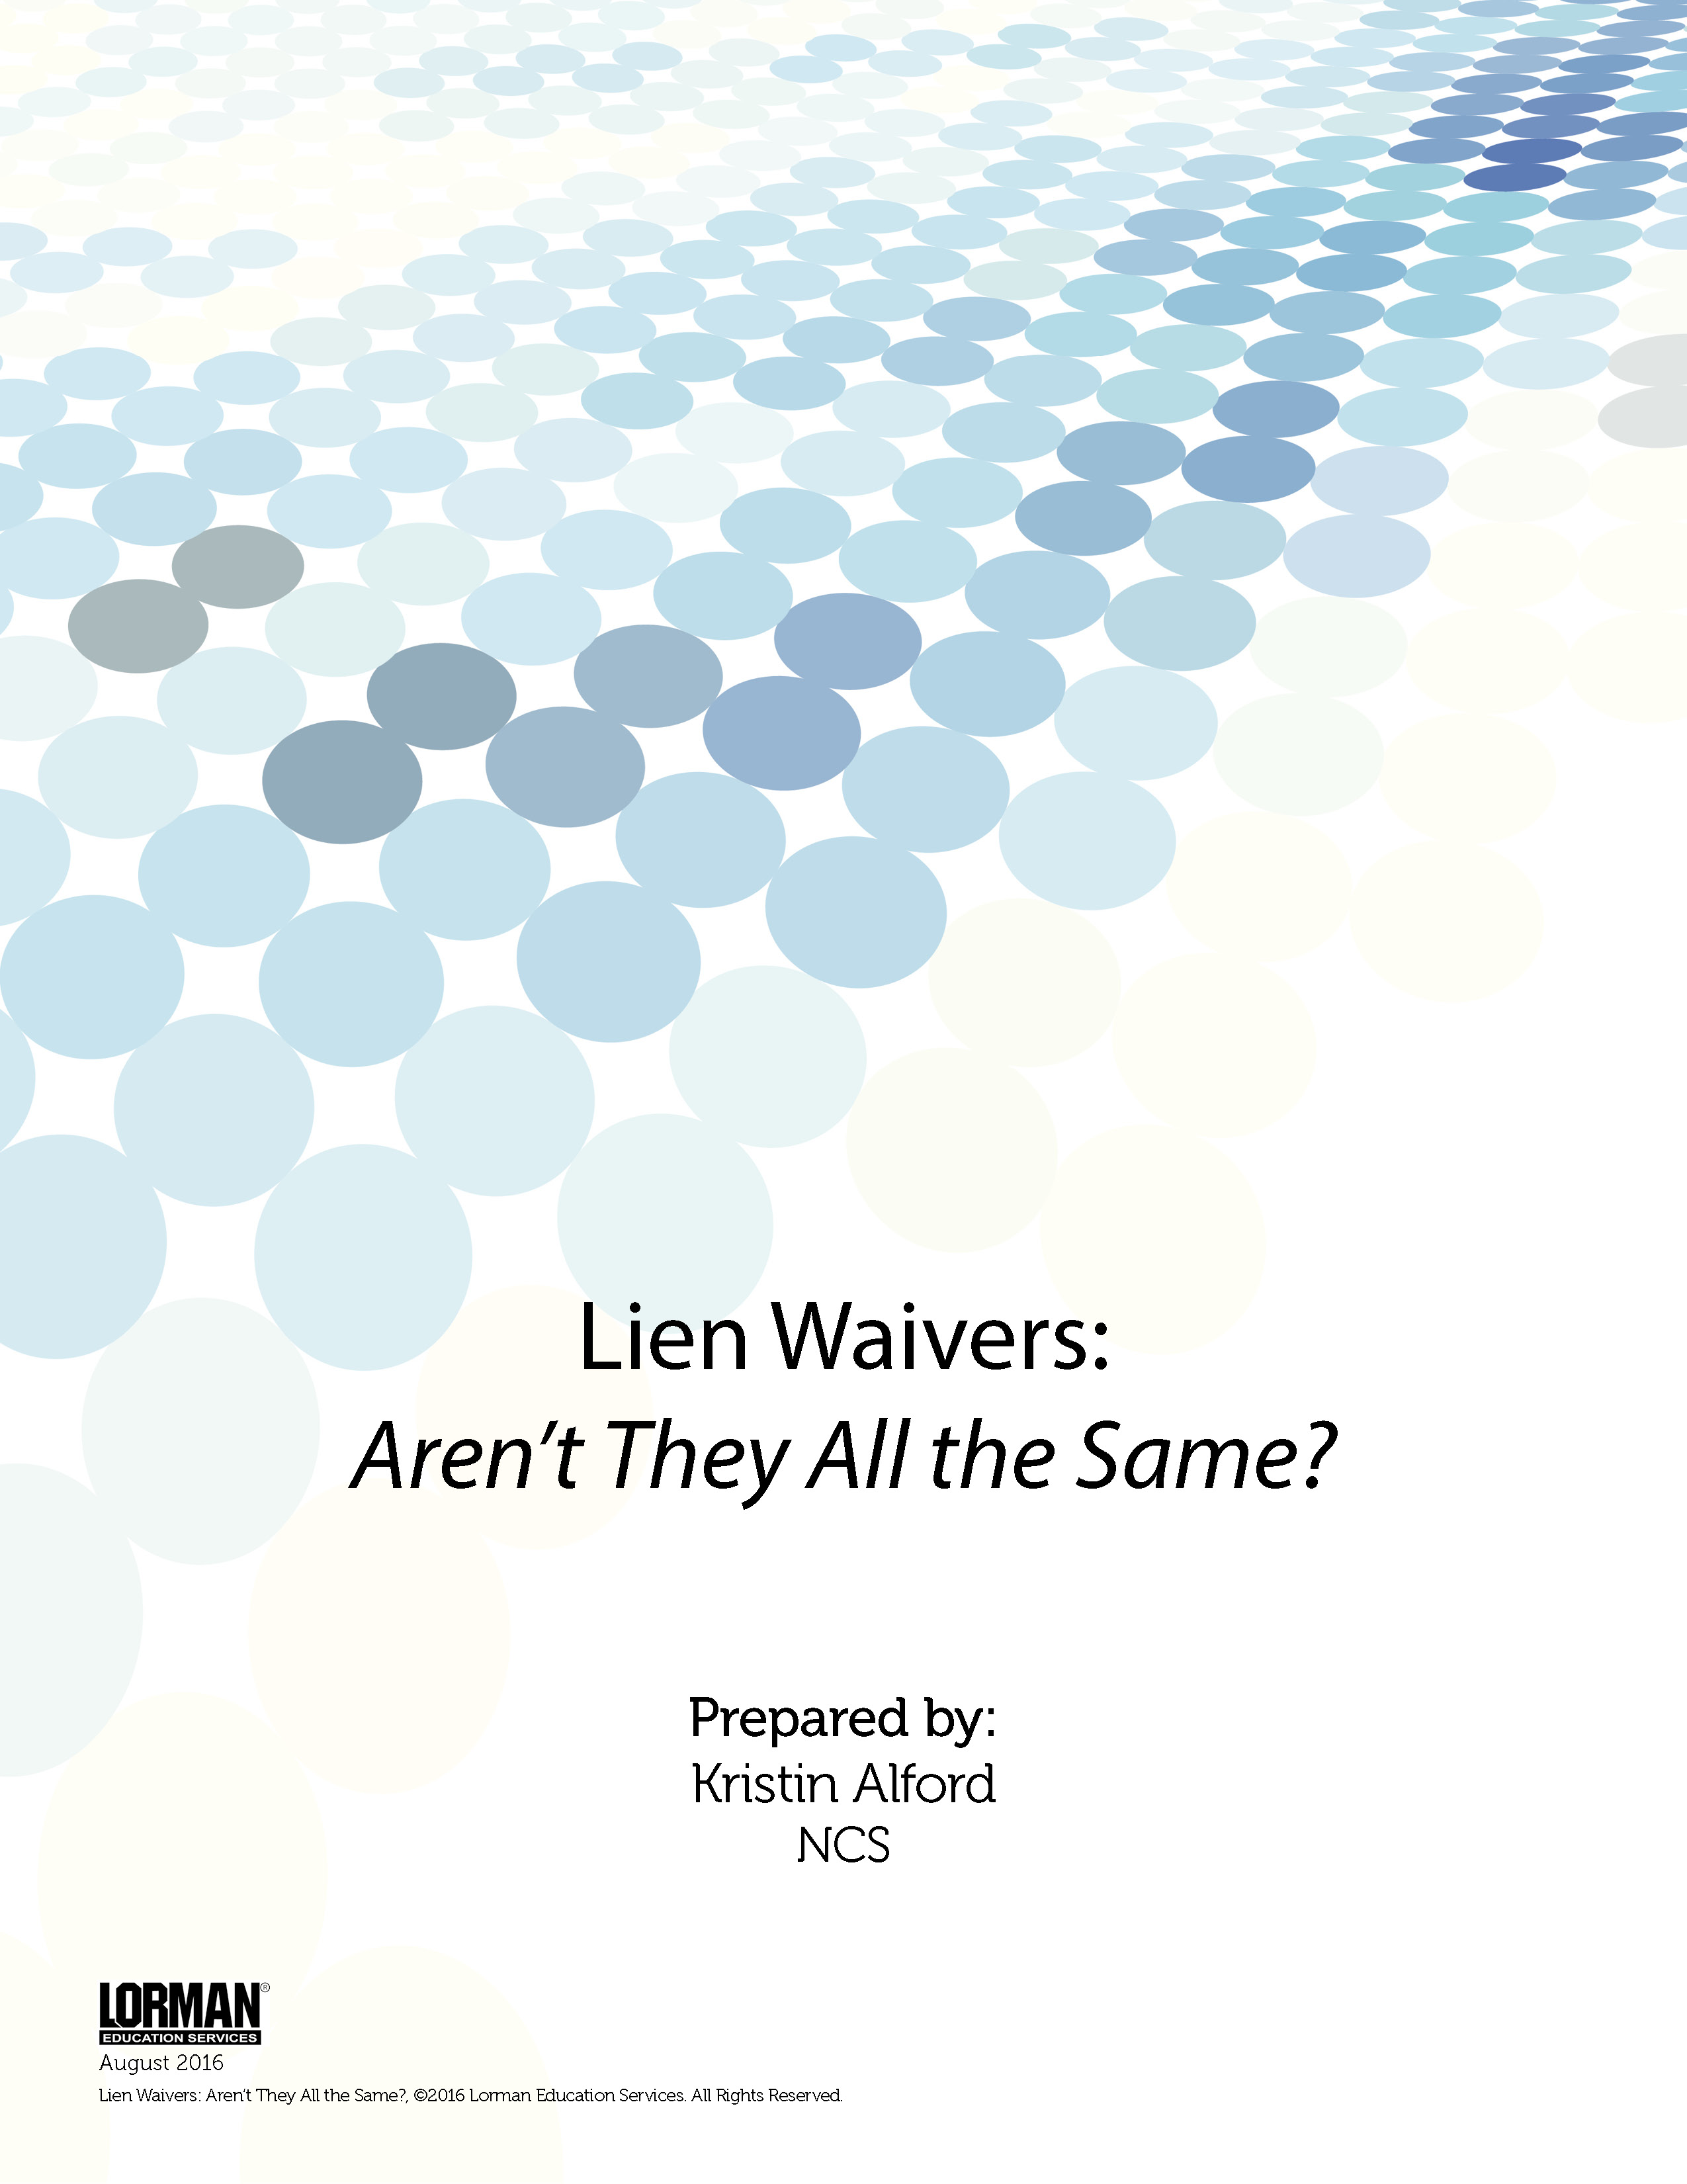 Lien Waivers - Aren’t They All the Same